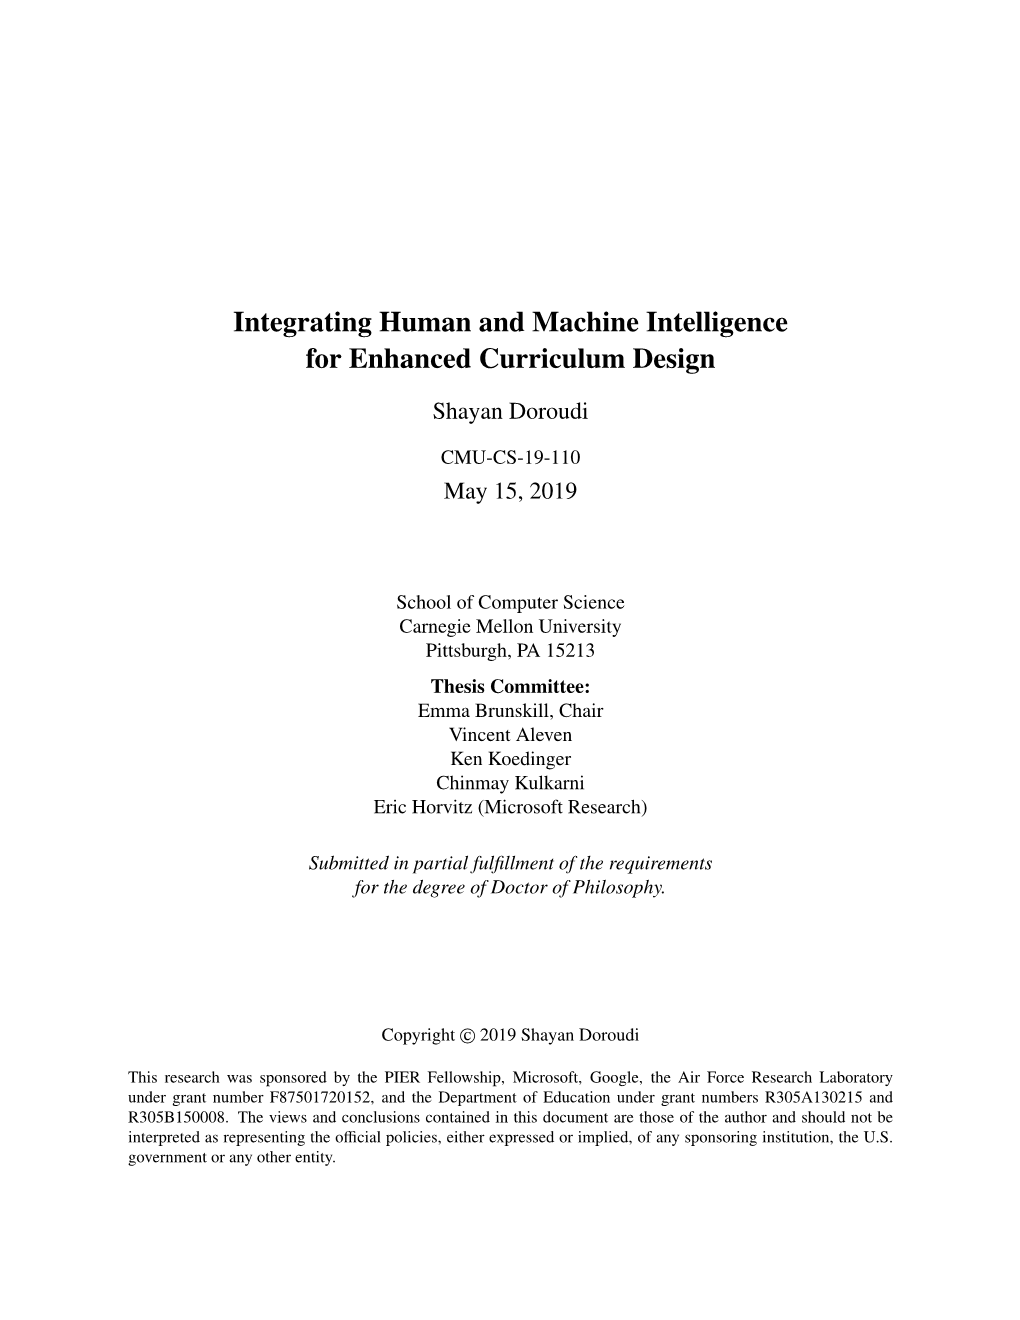 Integrating Human and Machine Intelligence for Enhanced Curriculum Design